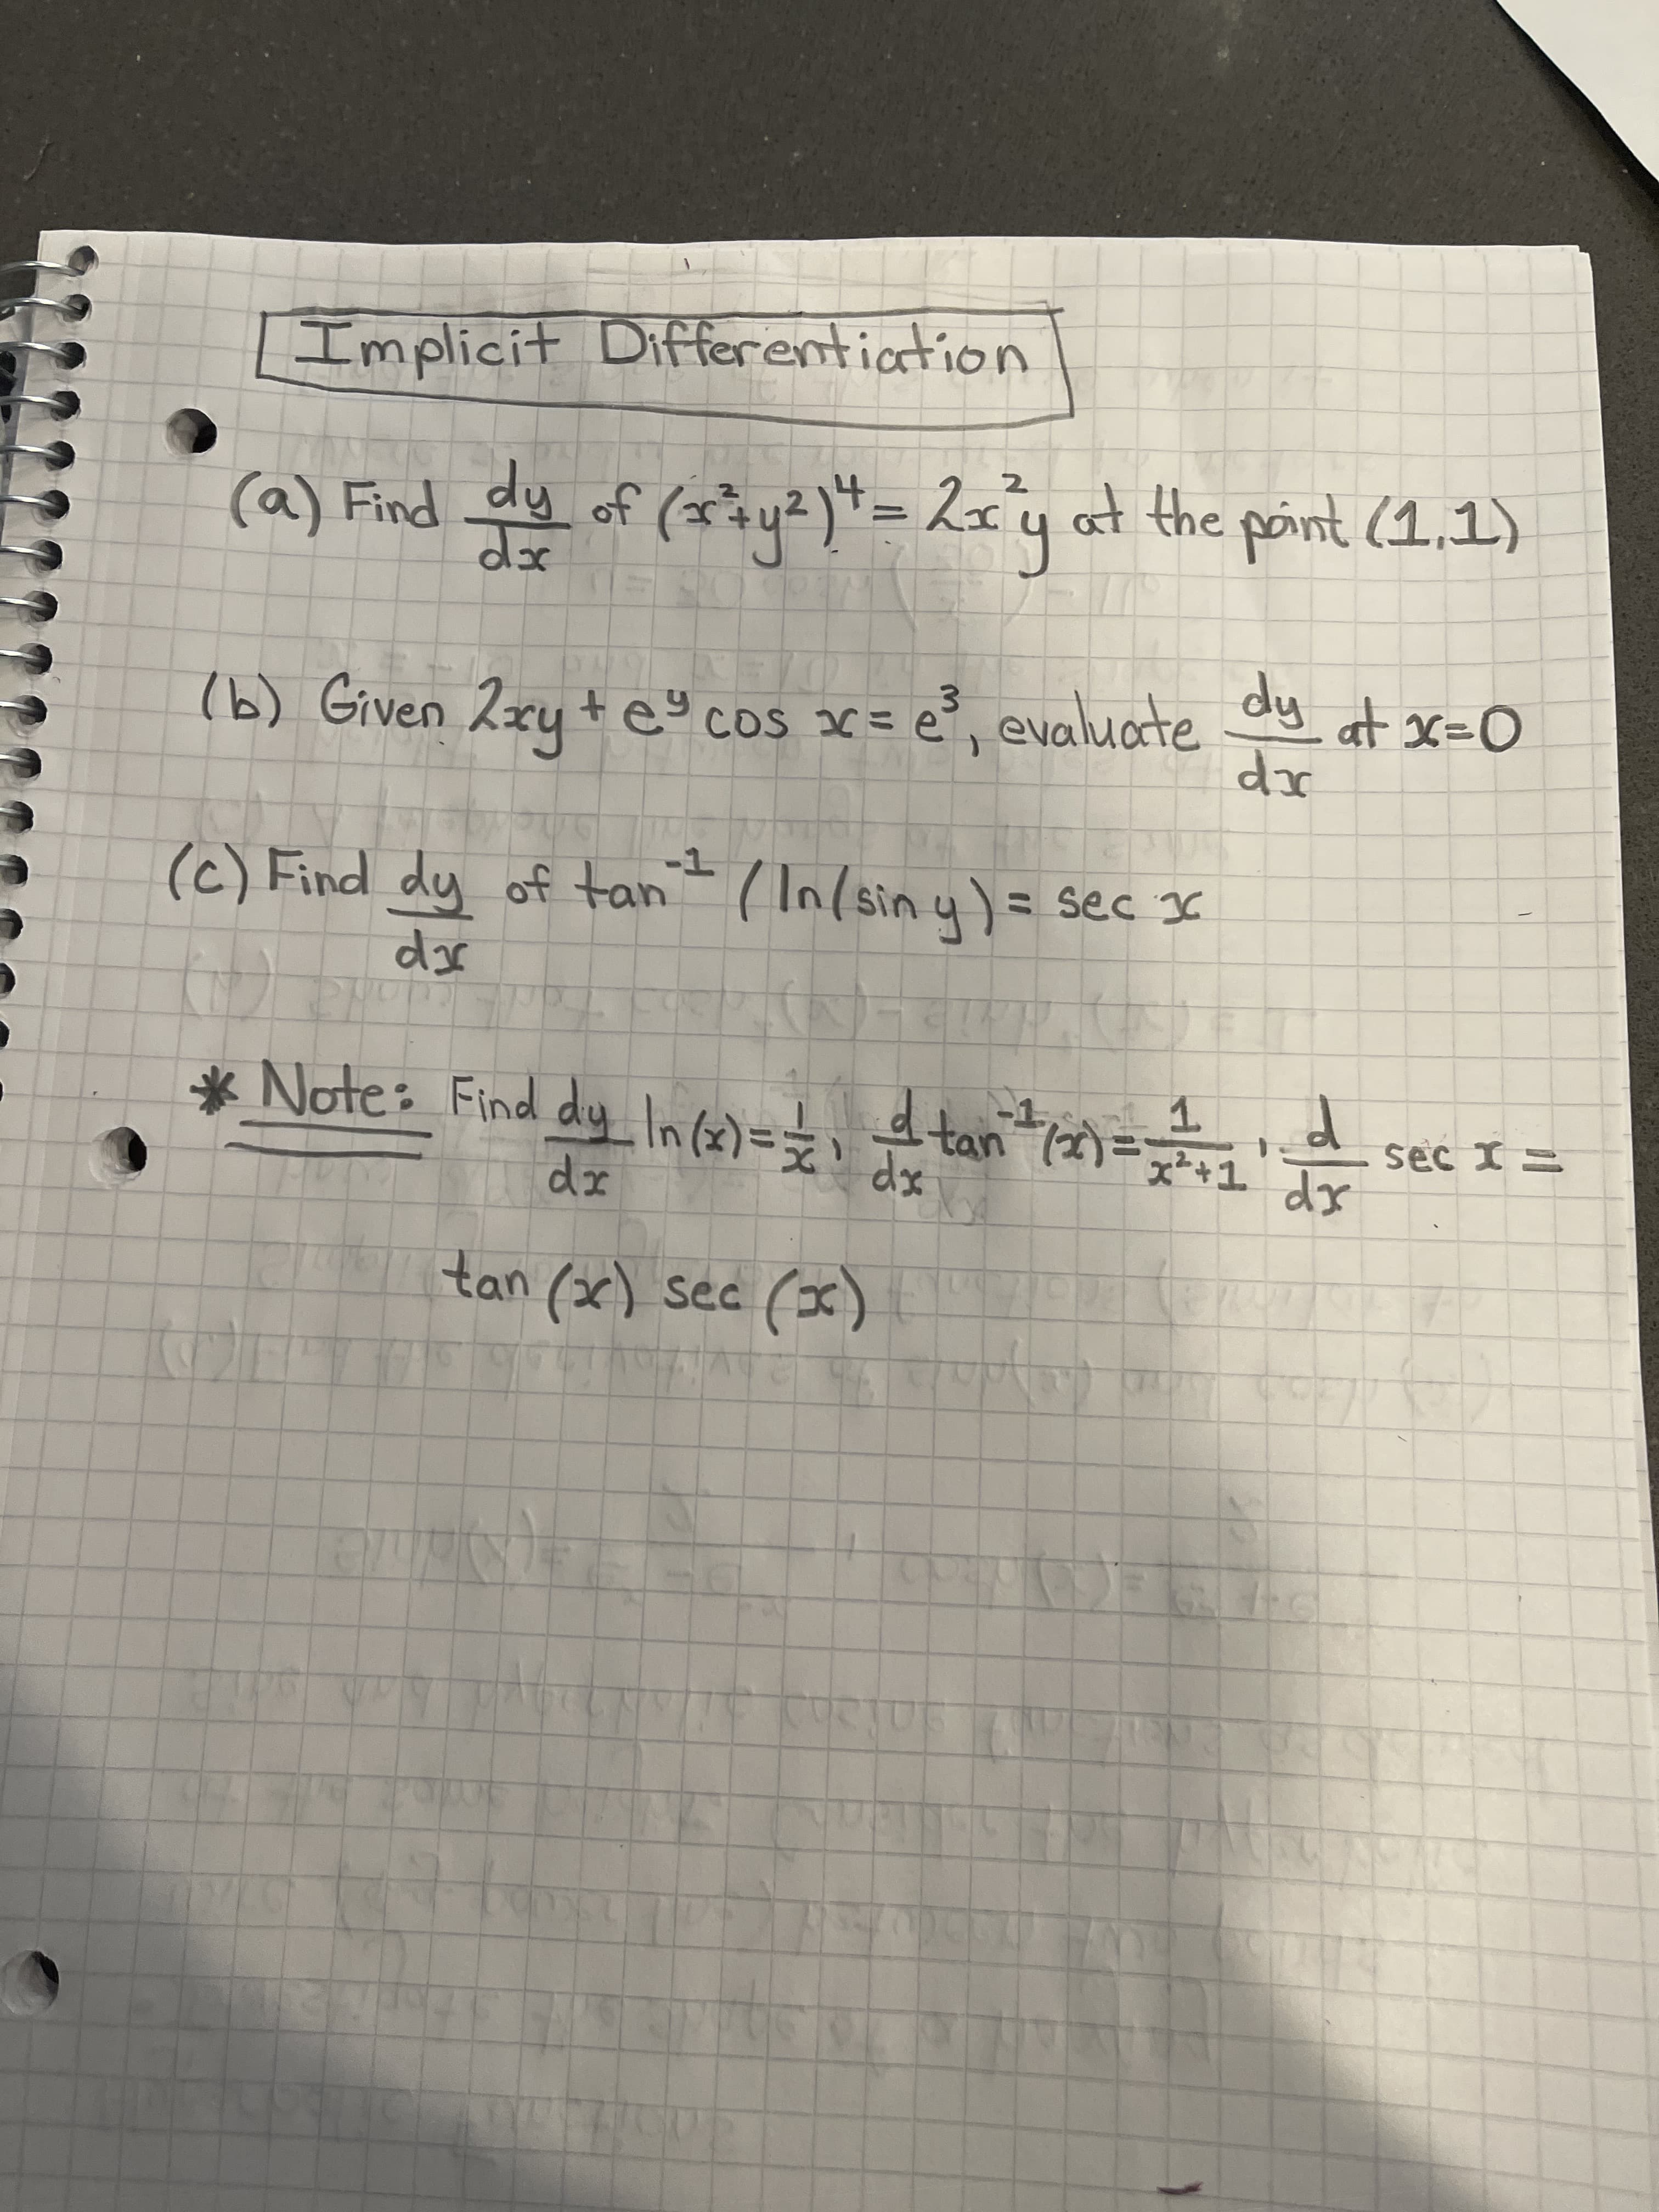 Implicit Differentiation
(a) Find dy of (x*u2 )*= 2xy at the point (1,1)
